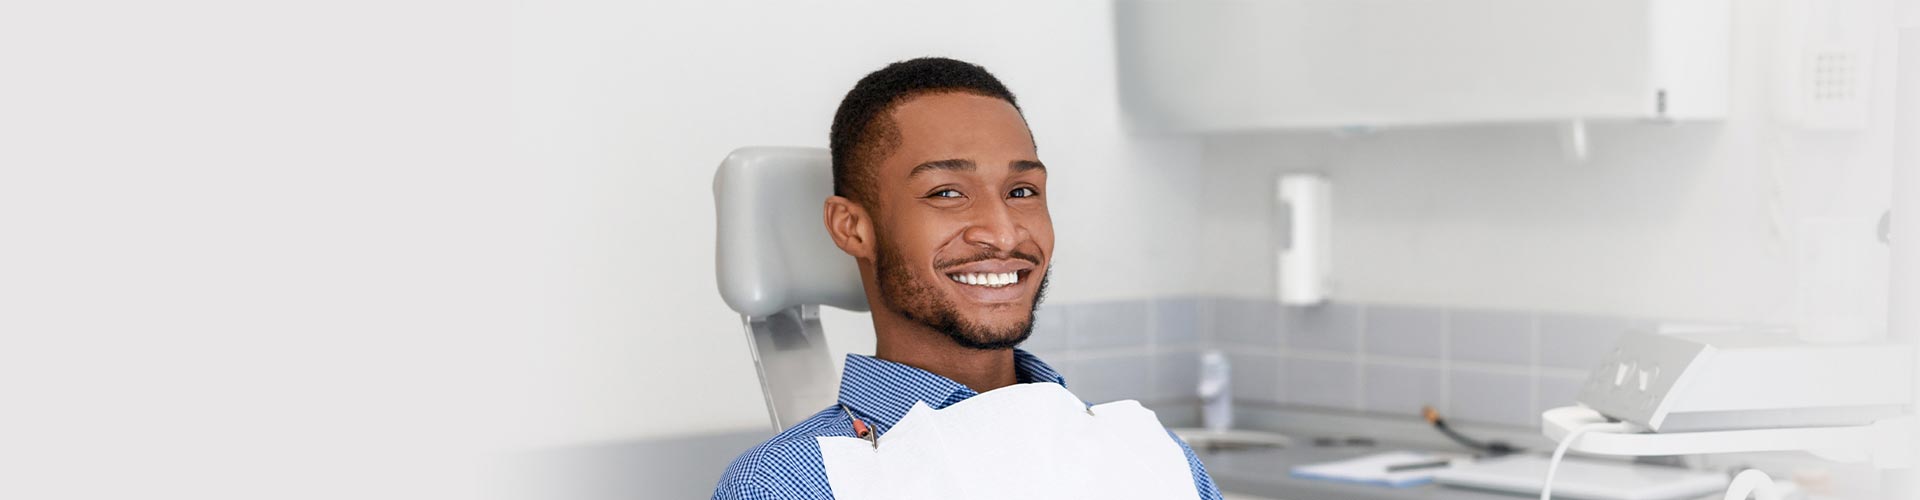 Smiling Patient at Clinic